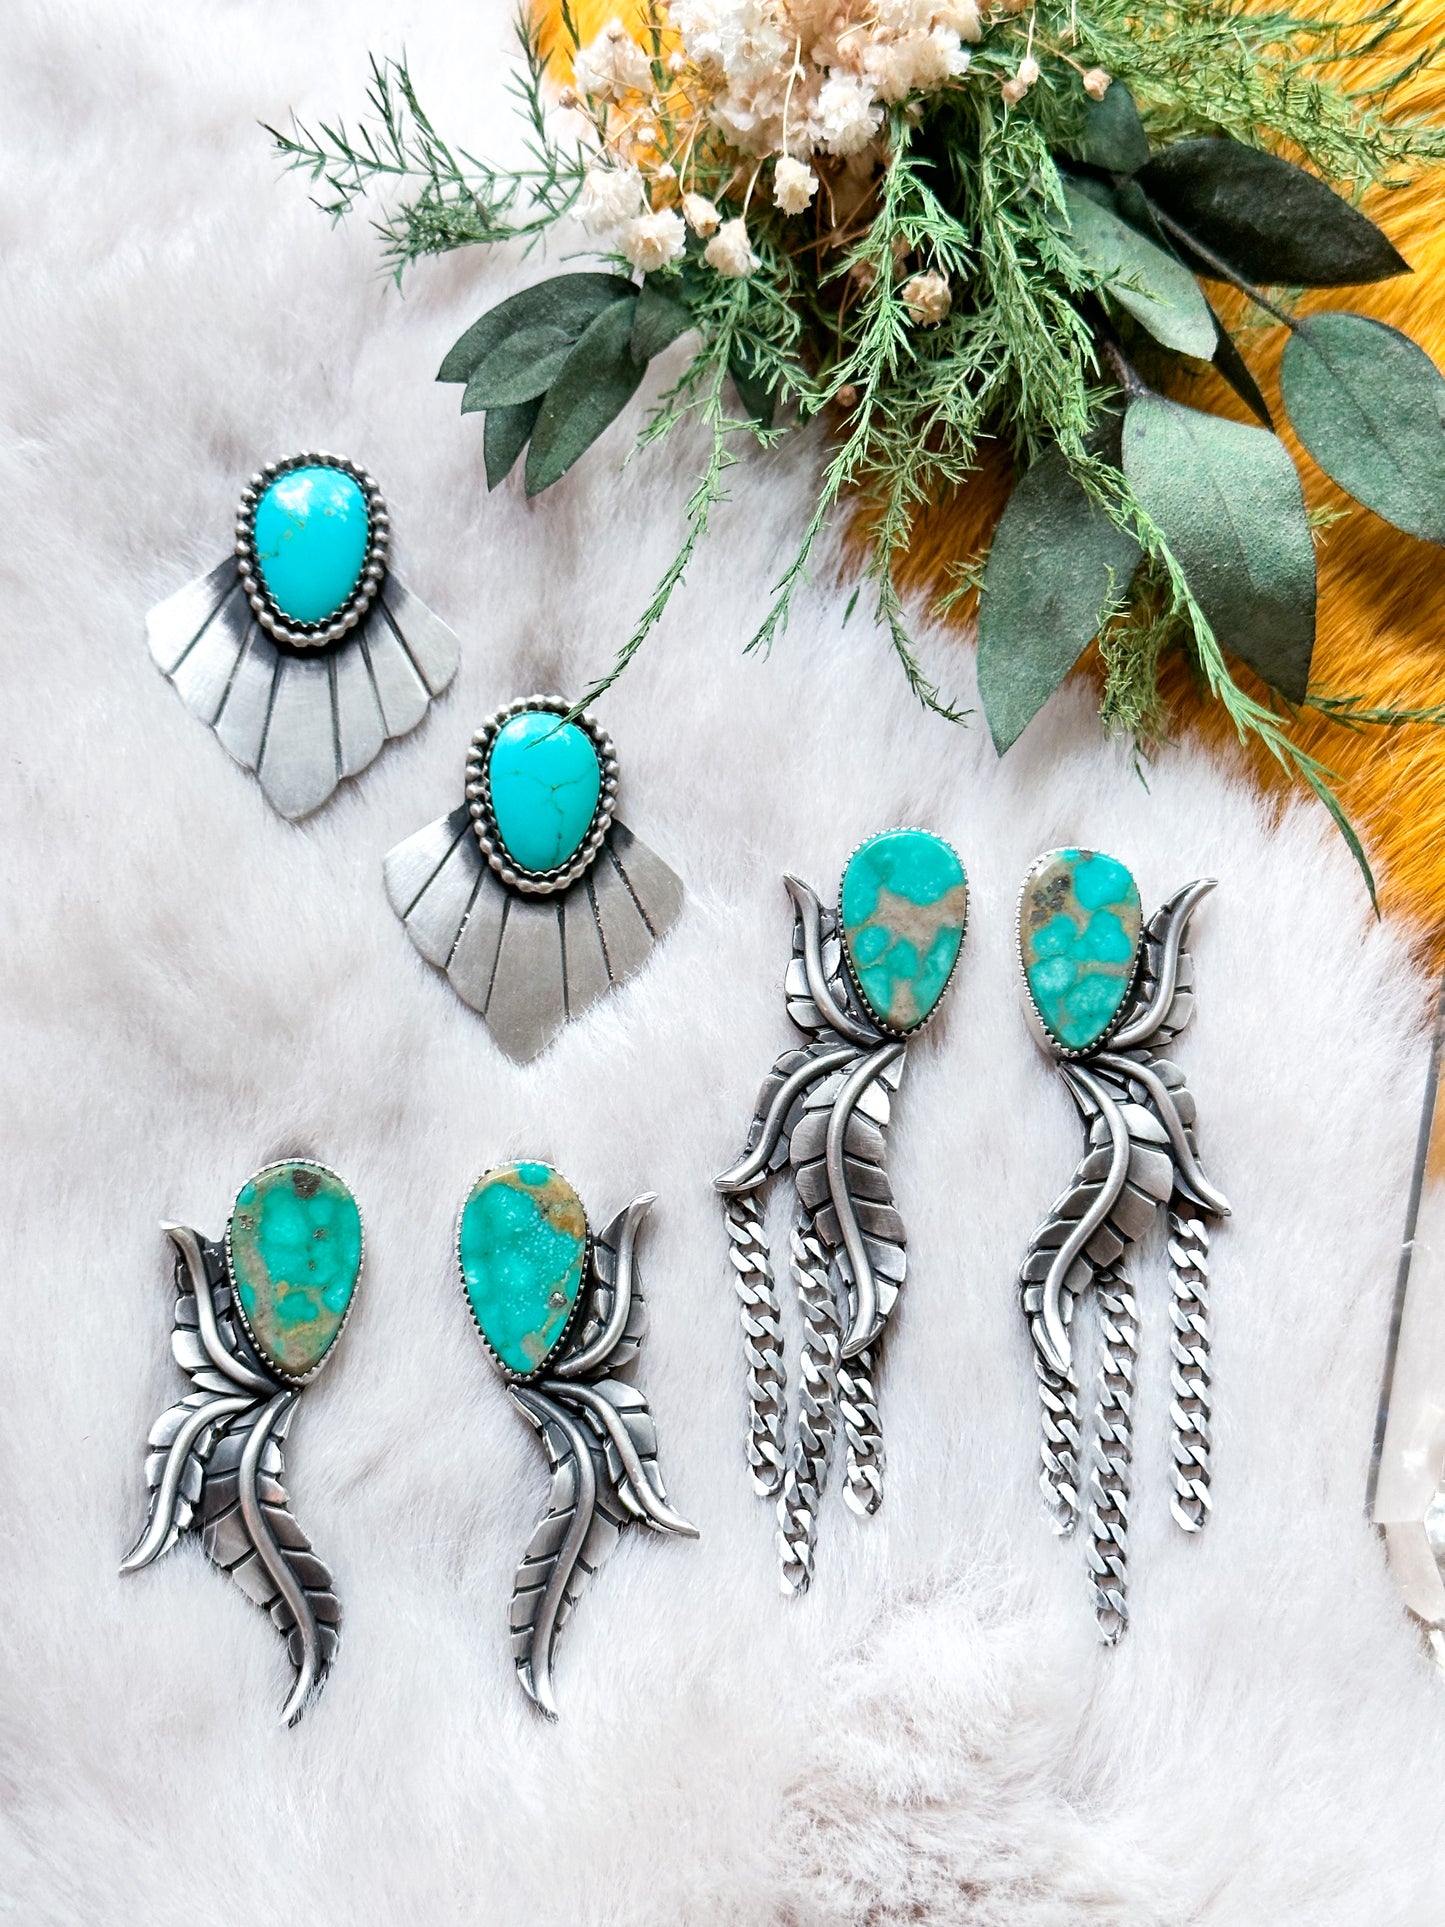 Botanical Fringe Earrings with Gorgeous Green and Gold Campitos Turquoise